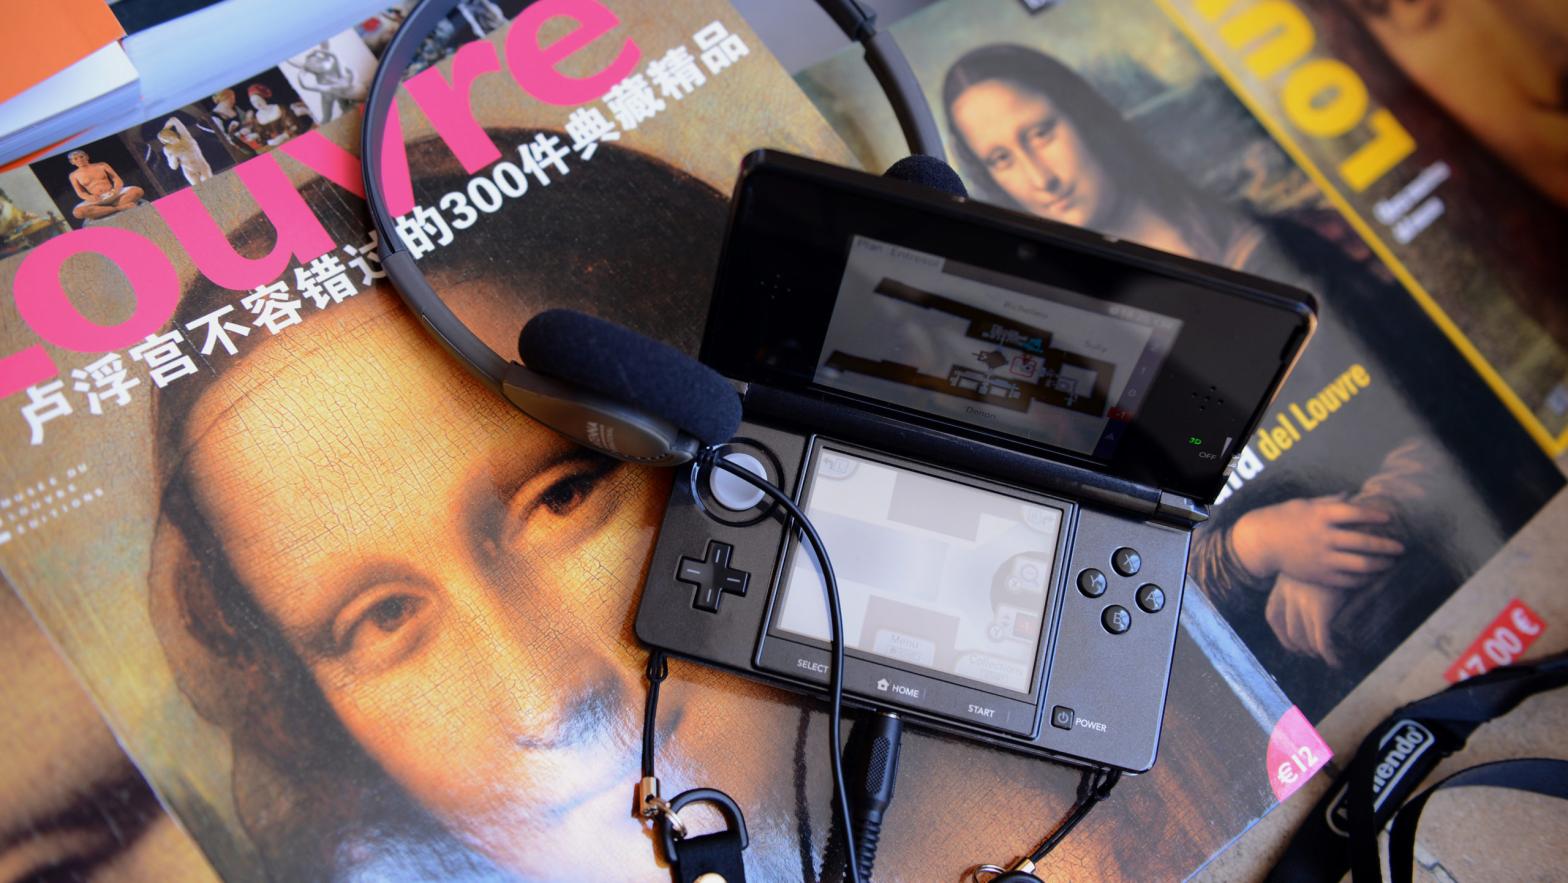 A picture of a Nintendo 3DS, which replaced audio guides at the Louvre Museum taken on April 12, 2012 in Paris. (Photo: Franck Fife/AFP, Getty Images)